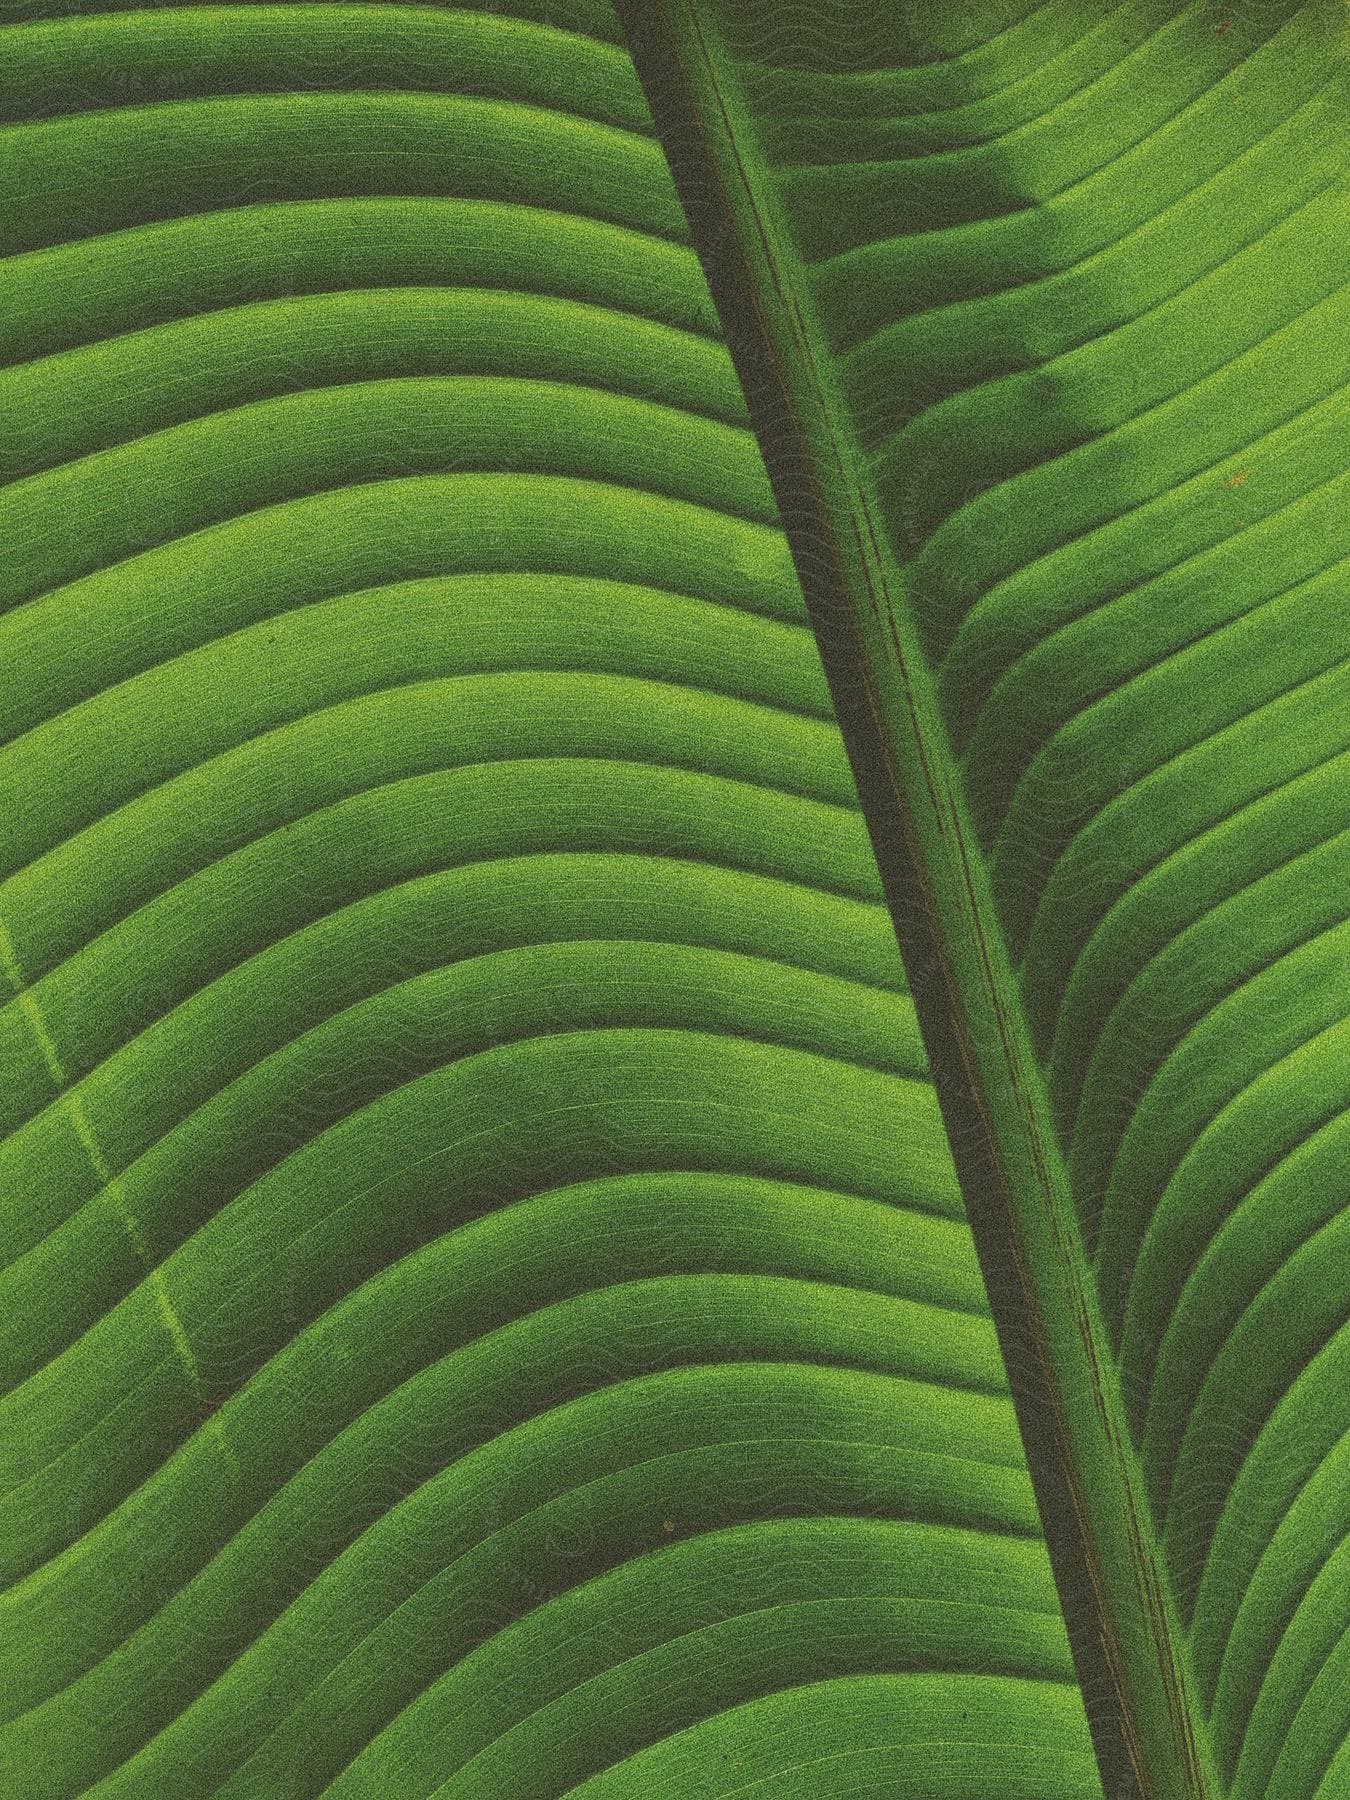 A closeup of a green leaf with its stem and texture